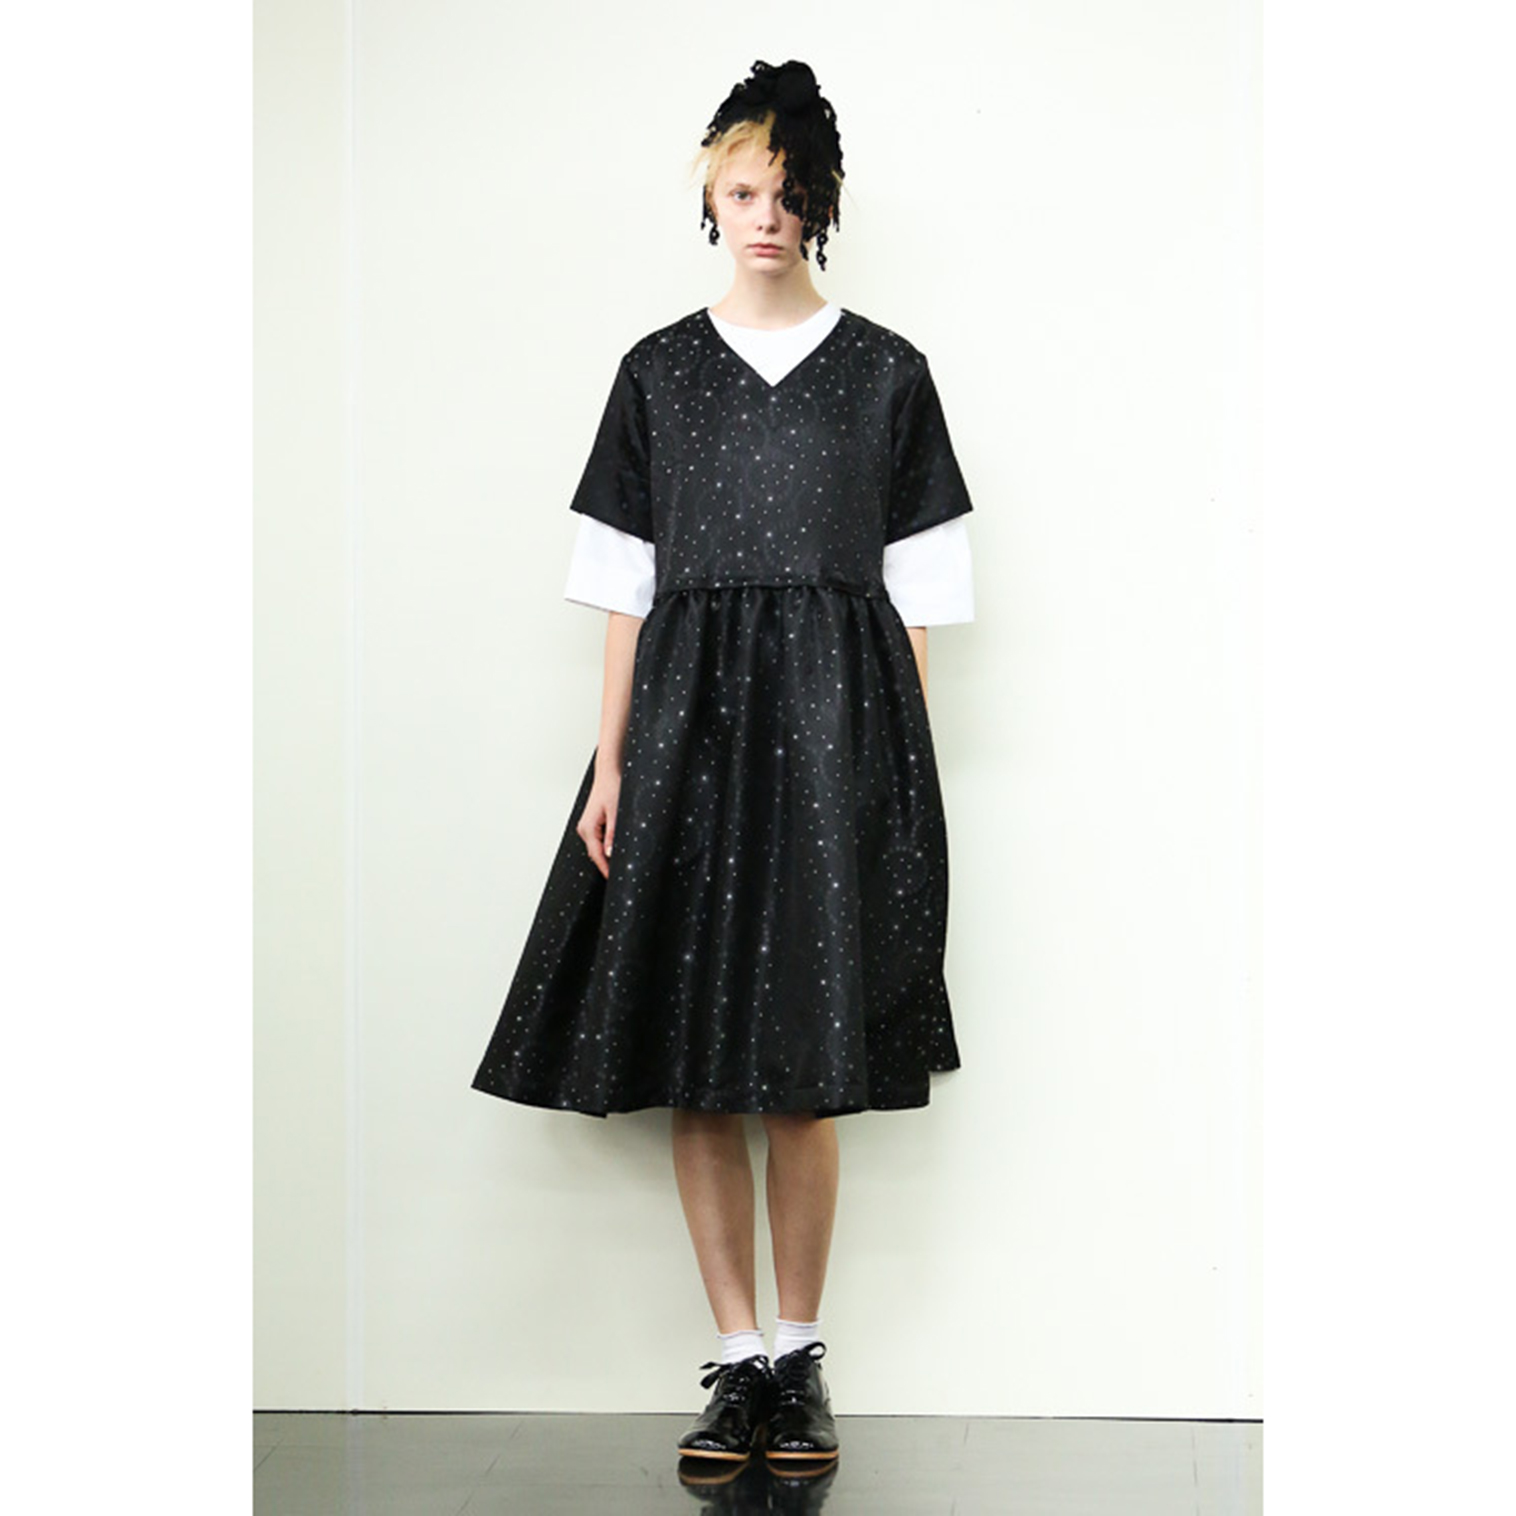 tricot COMME des GARCONS ワンピース S